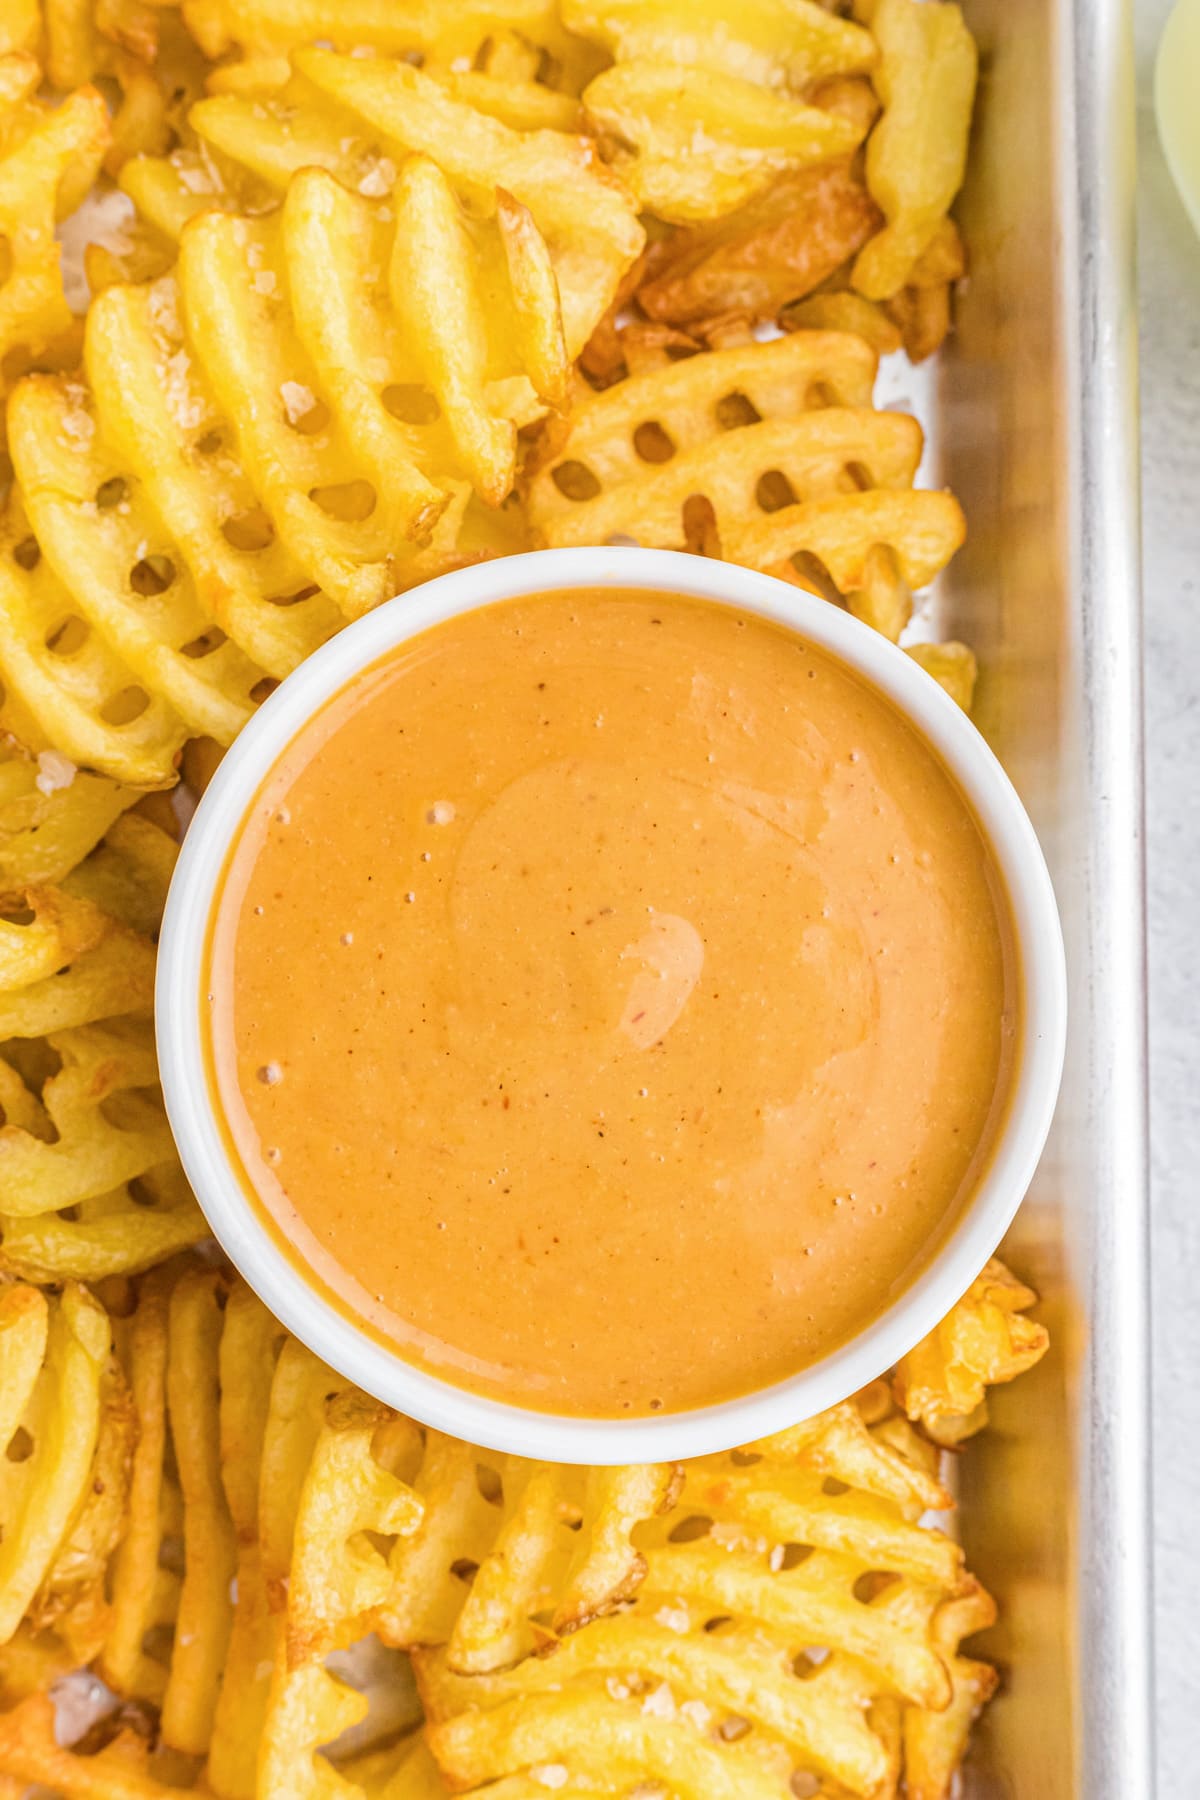 Chick fil a sauce served with waffle fries.